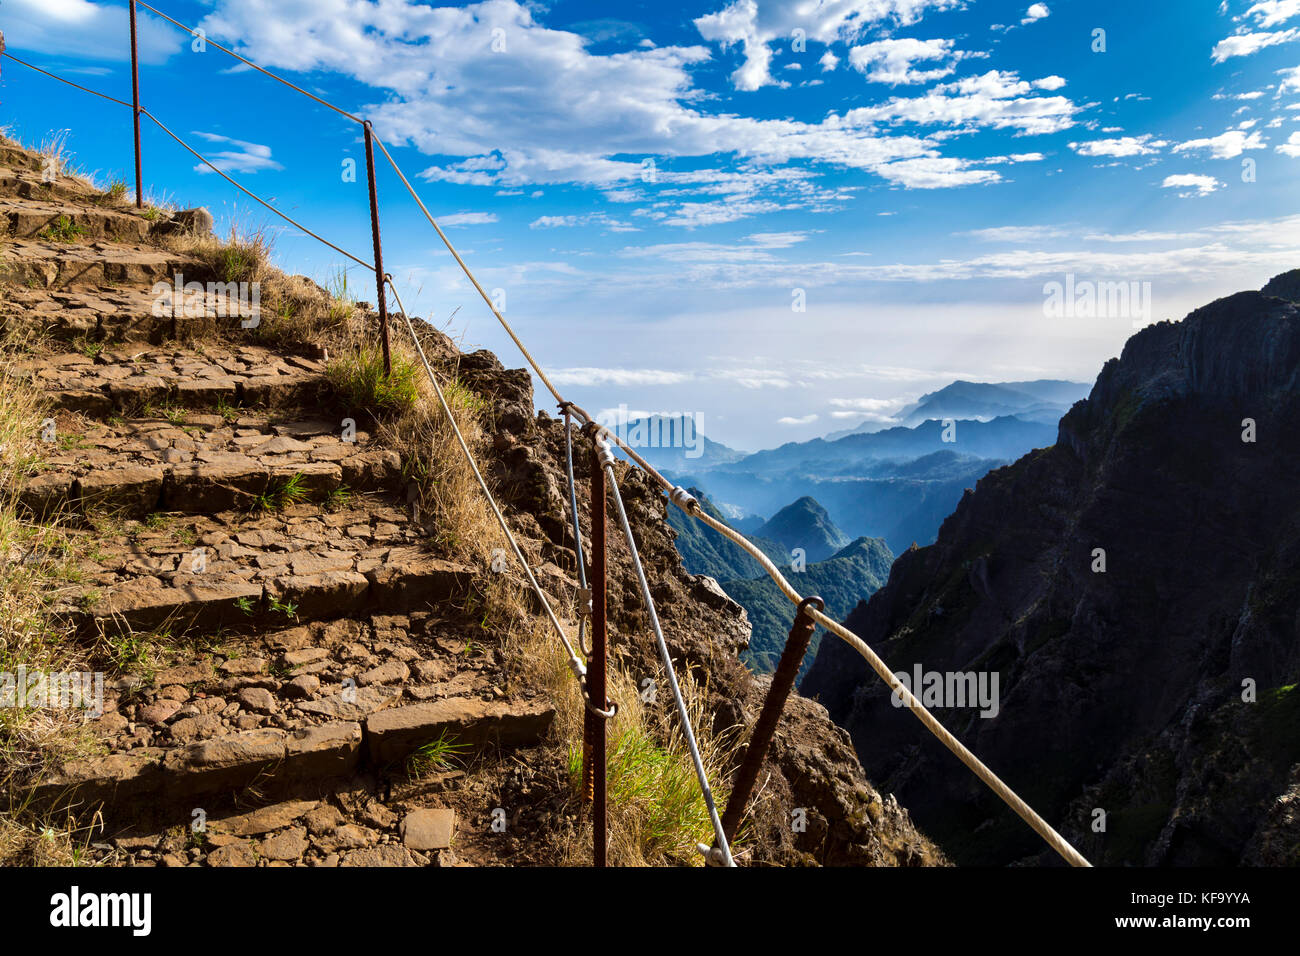 Stunning scenery of mountains and the high altitude hiking trail between Pico do Arieiro and Rico Ruivo, Madeira, Portugal Stock Photo